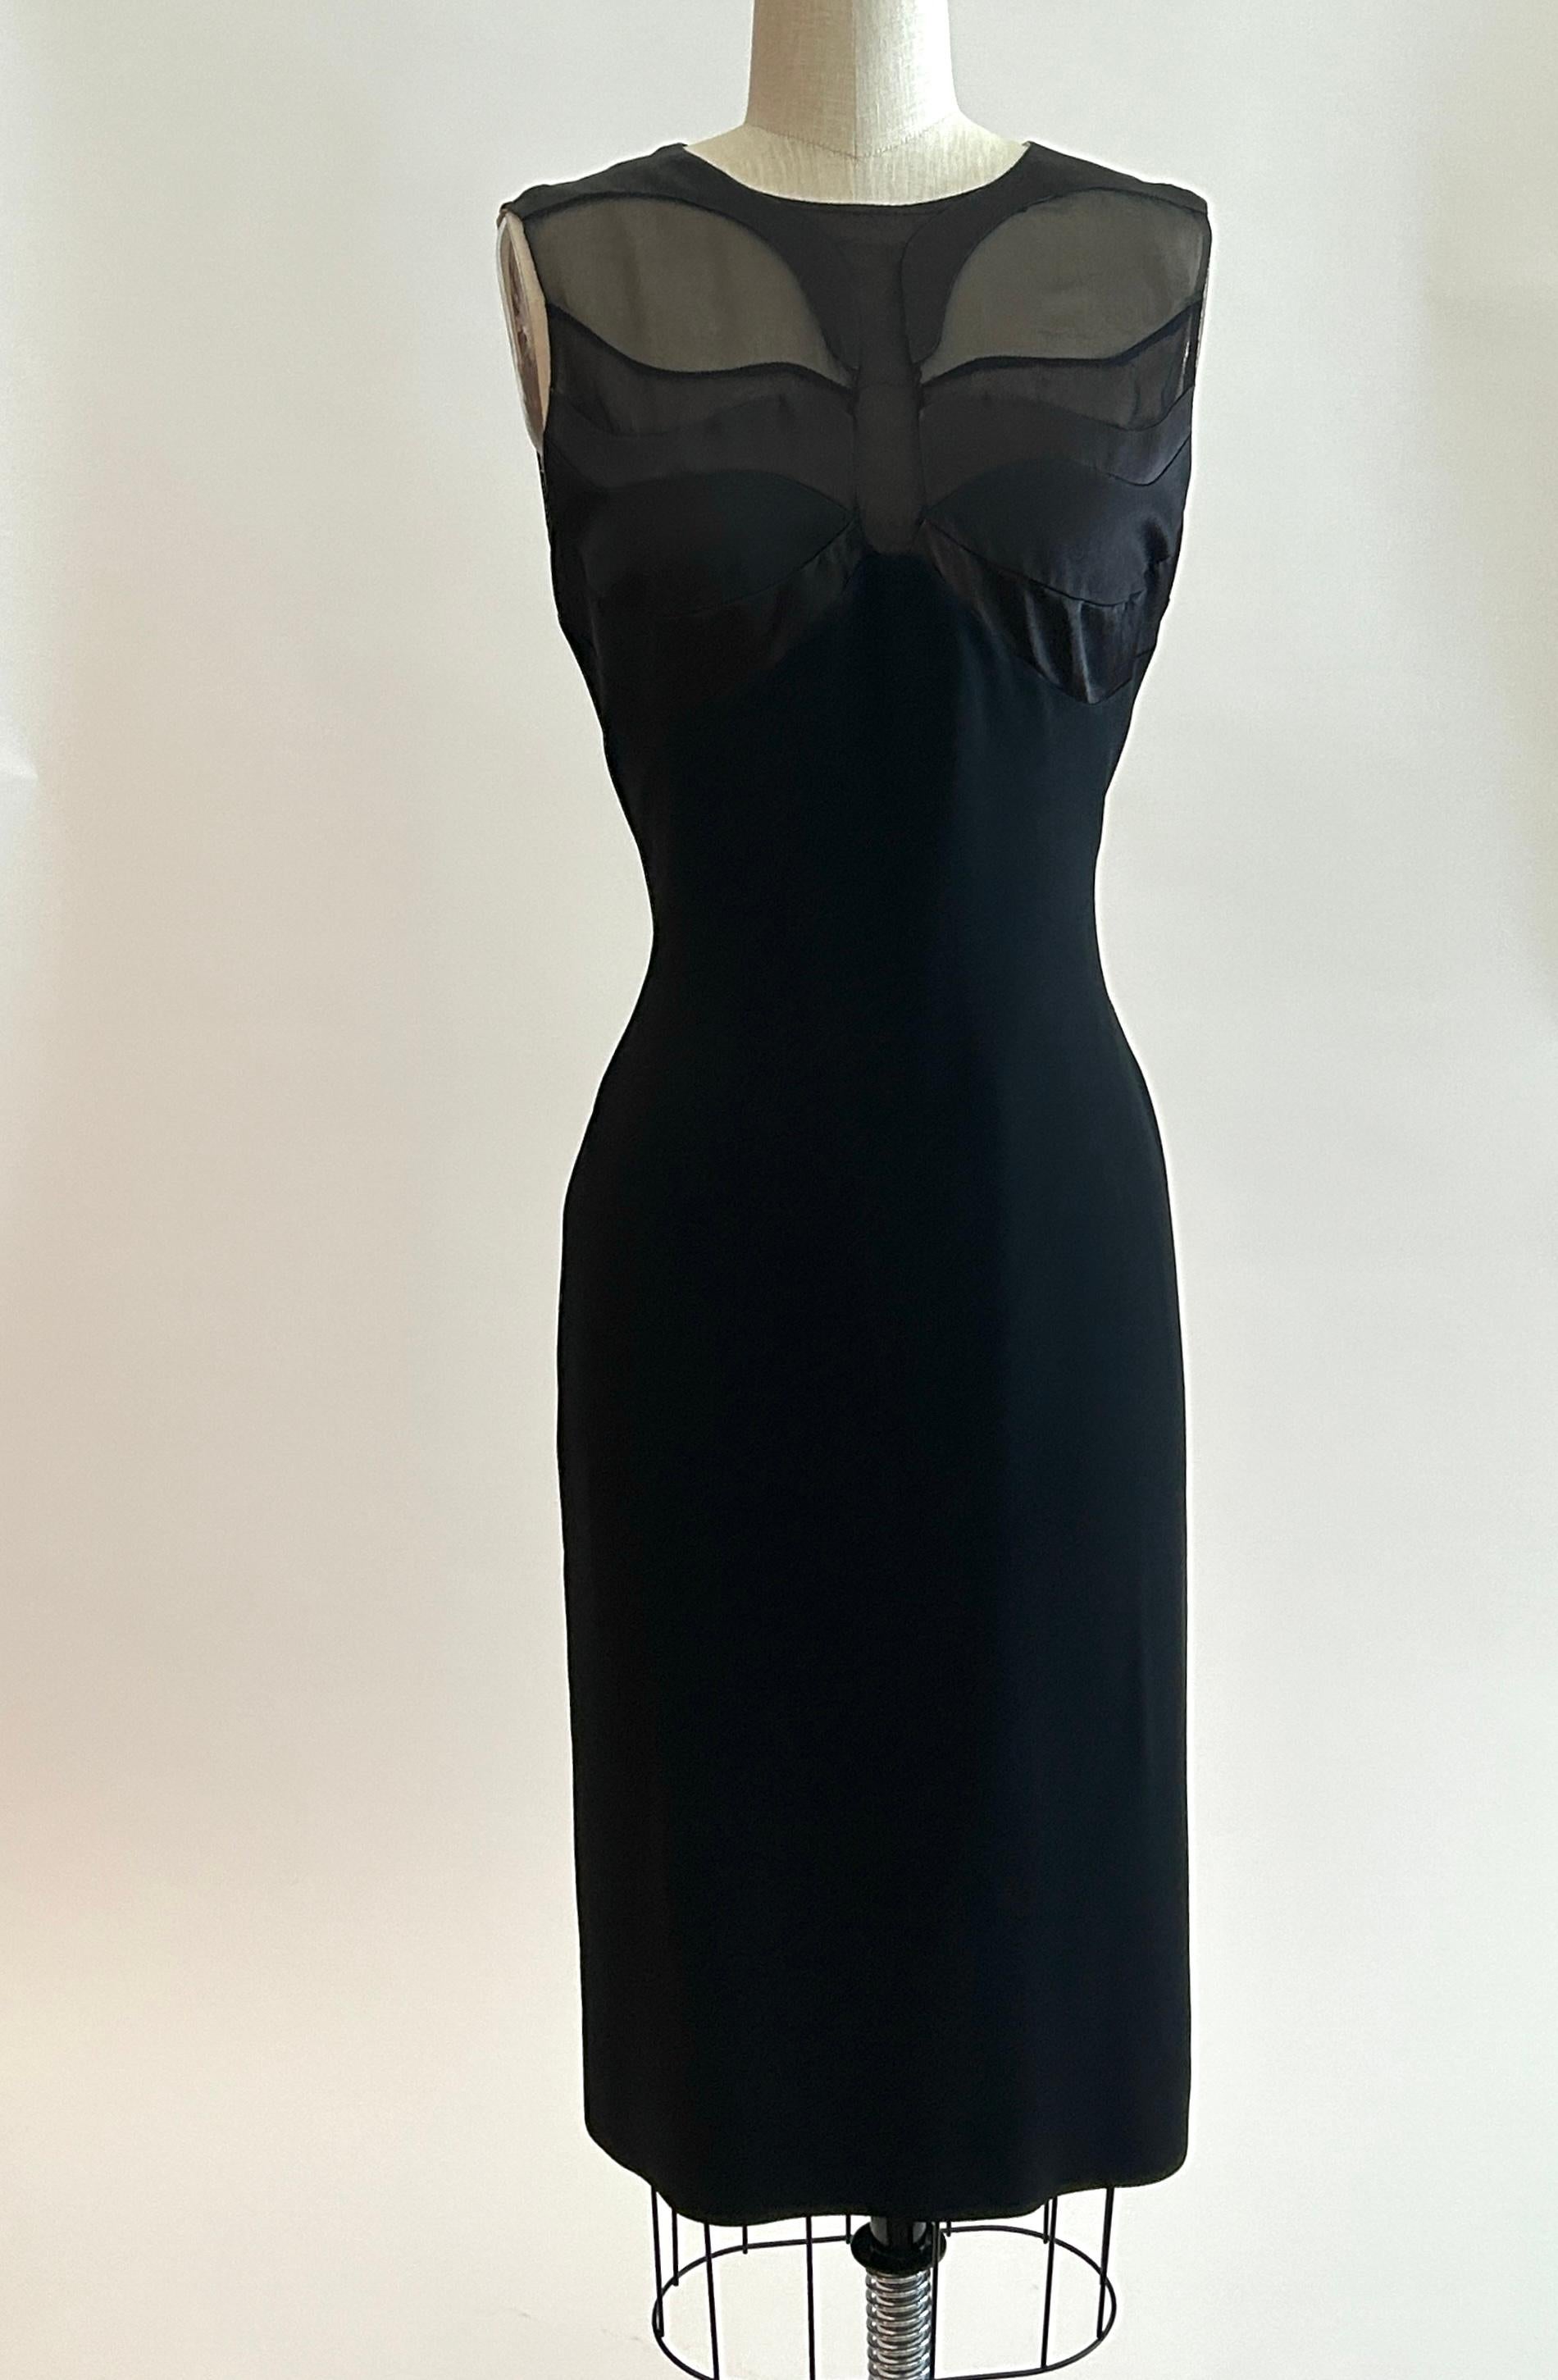 Alexander McQueen black pencil dress with multi-toned black satin, mesh and sheer panels at bust creating a butterfly. Nude lining. Back zip and hook and eye closure. 

50% viscose, 40% acetate, 10% silk. 
Lined in a light weight nude fabric (feels